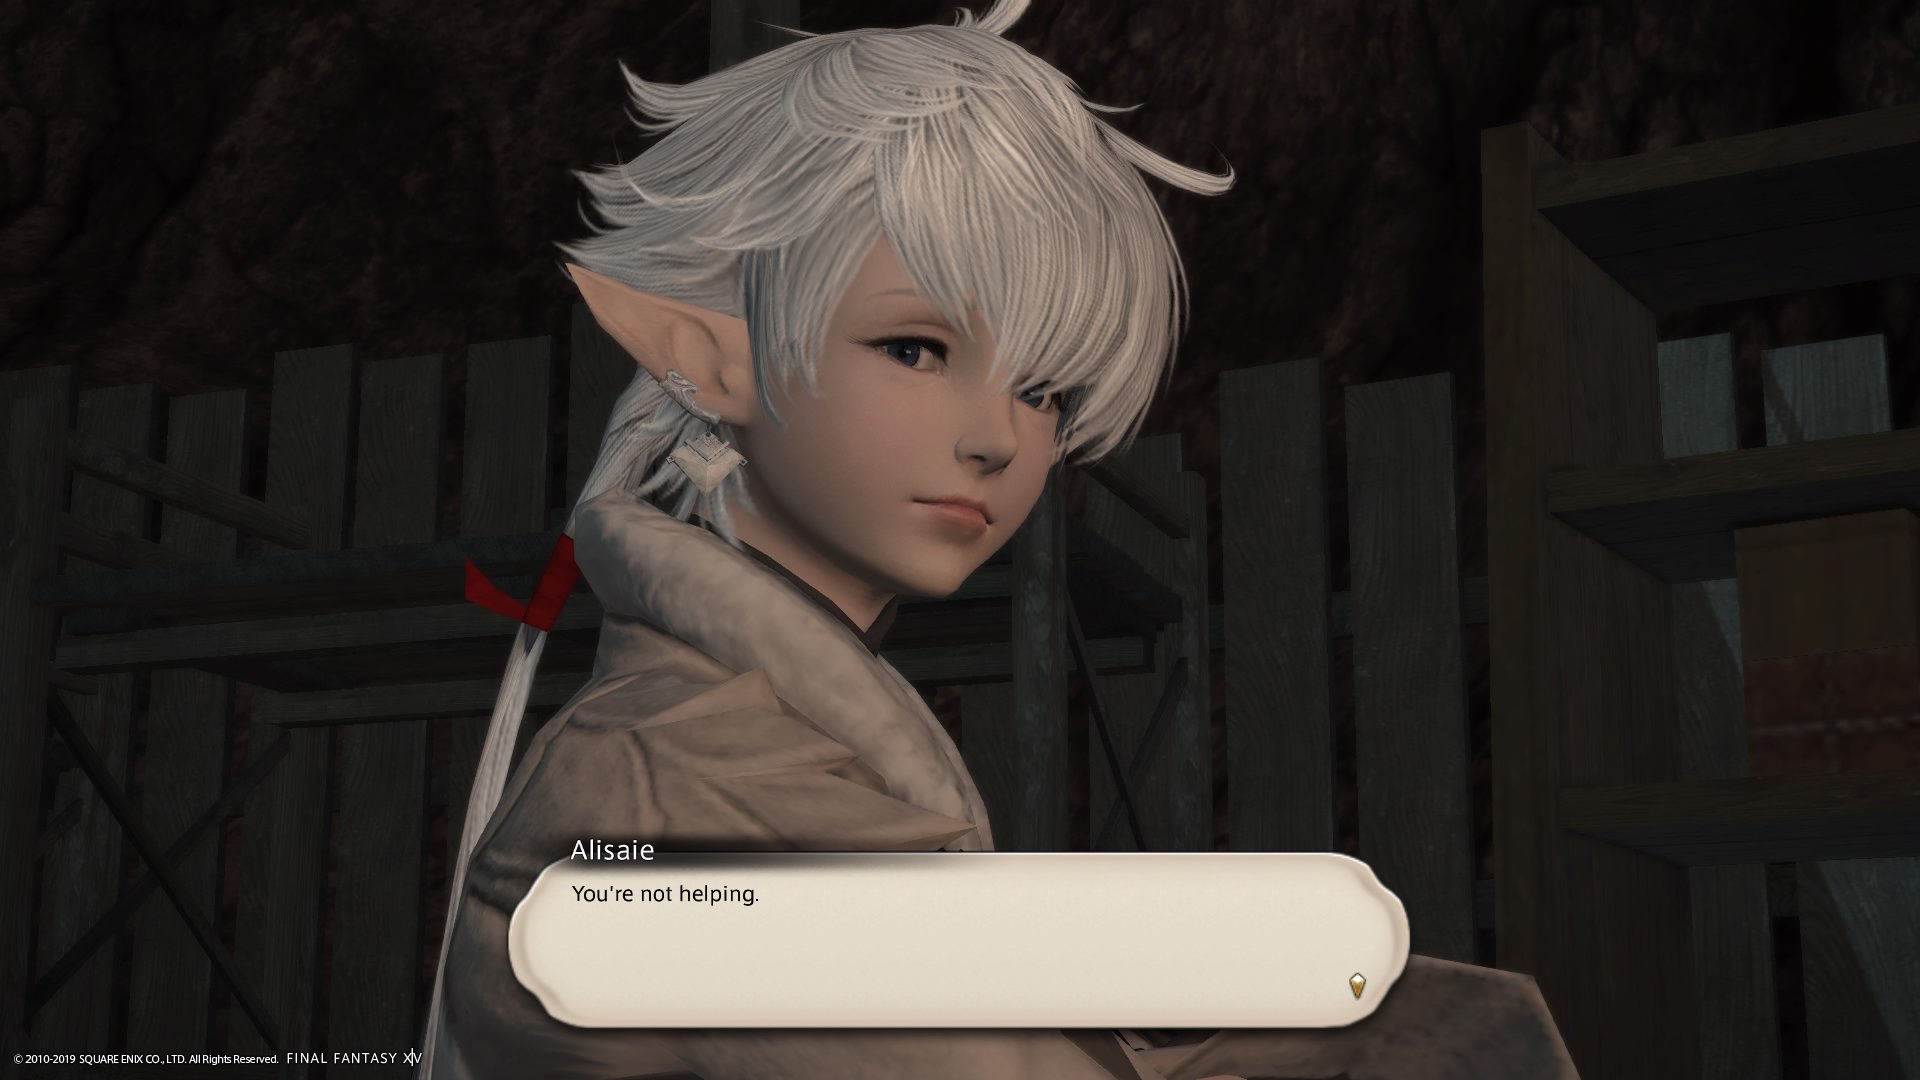 “More pouty Alisaie pls

Poutisaie” .